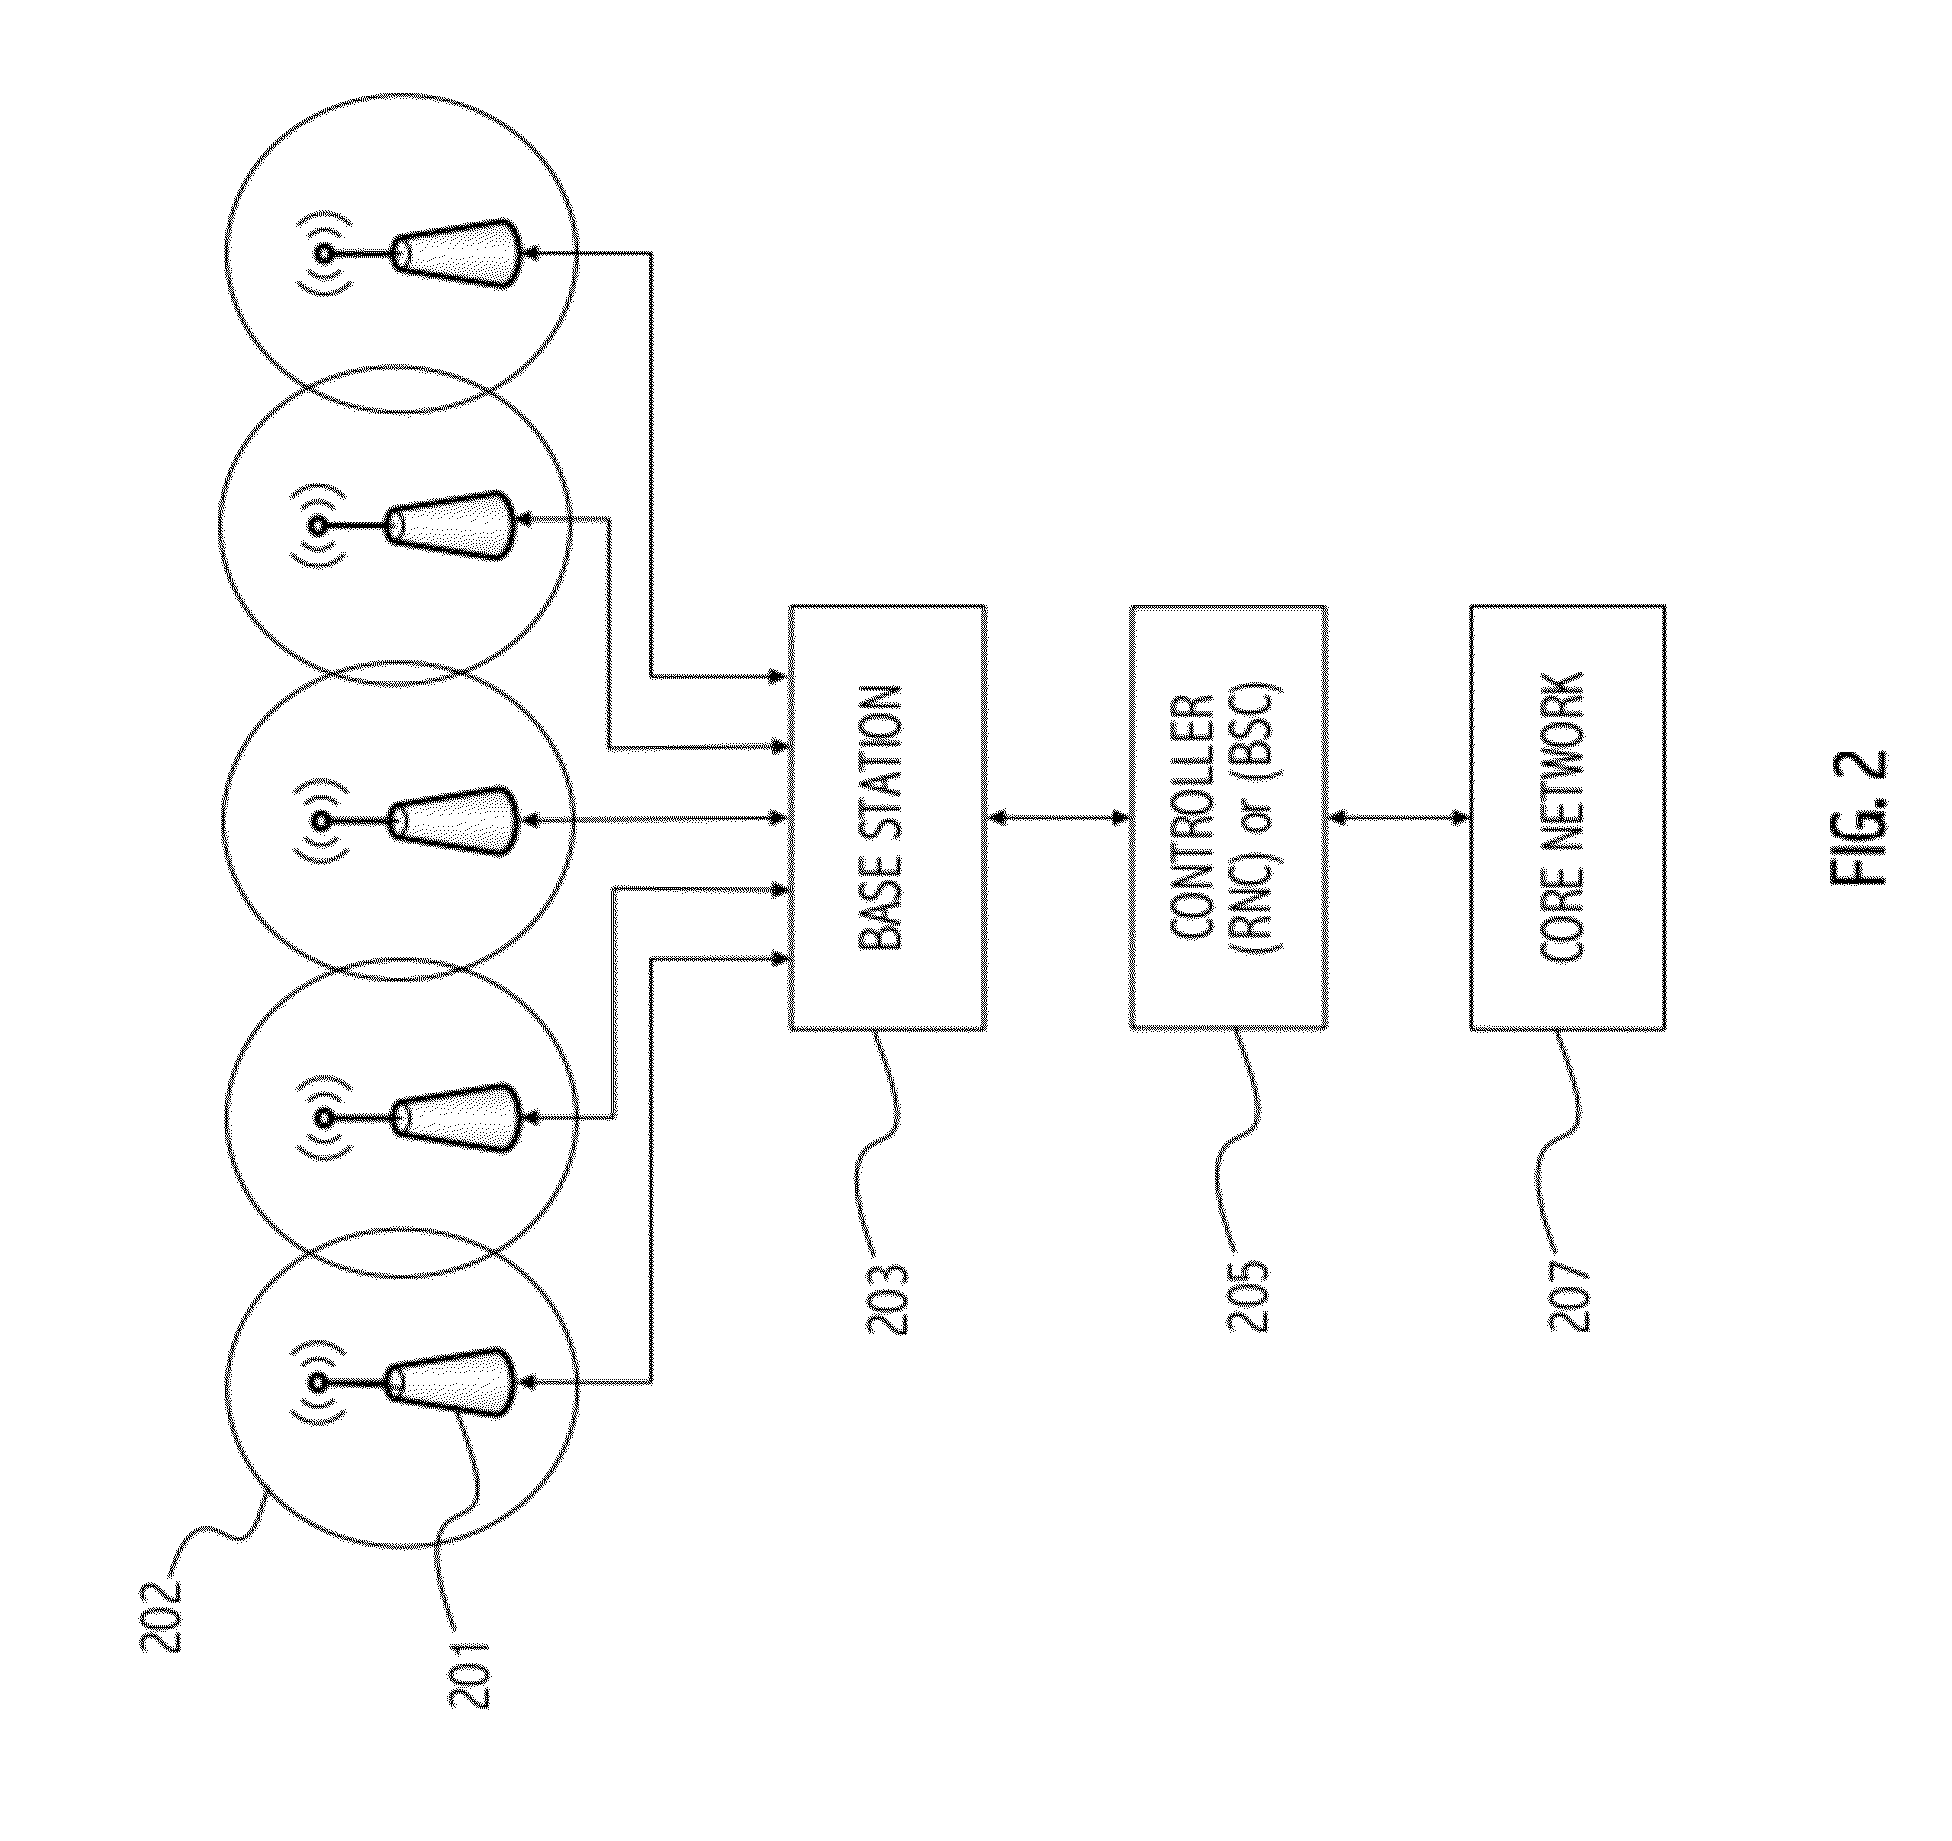 Monitoring system for distributed antenna systems